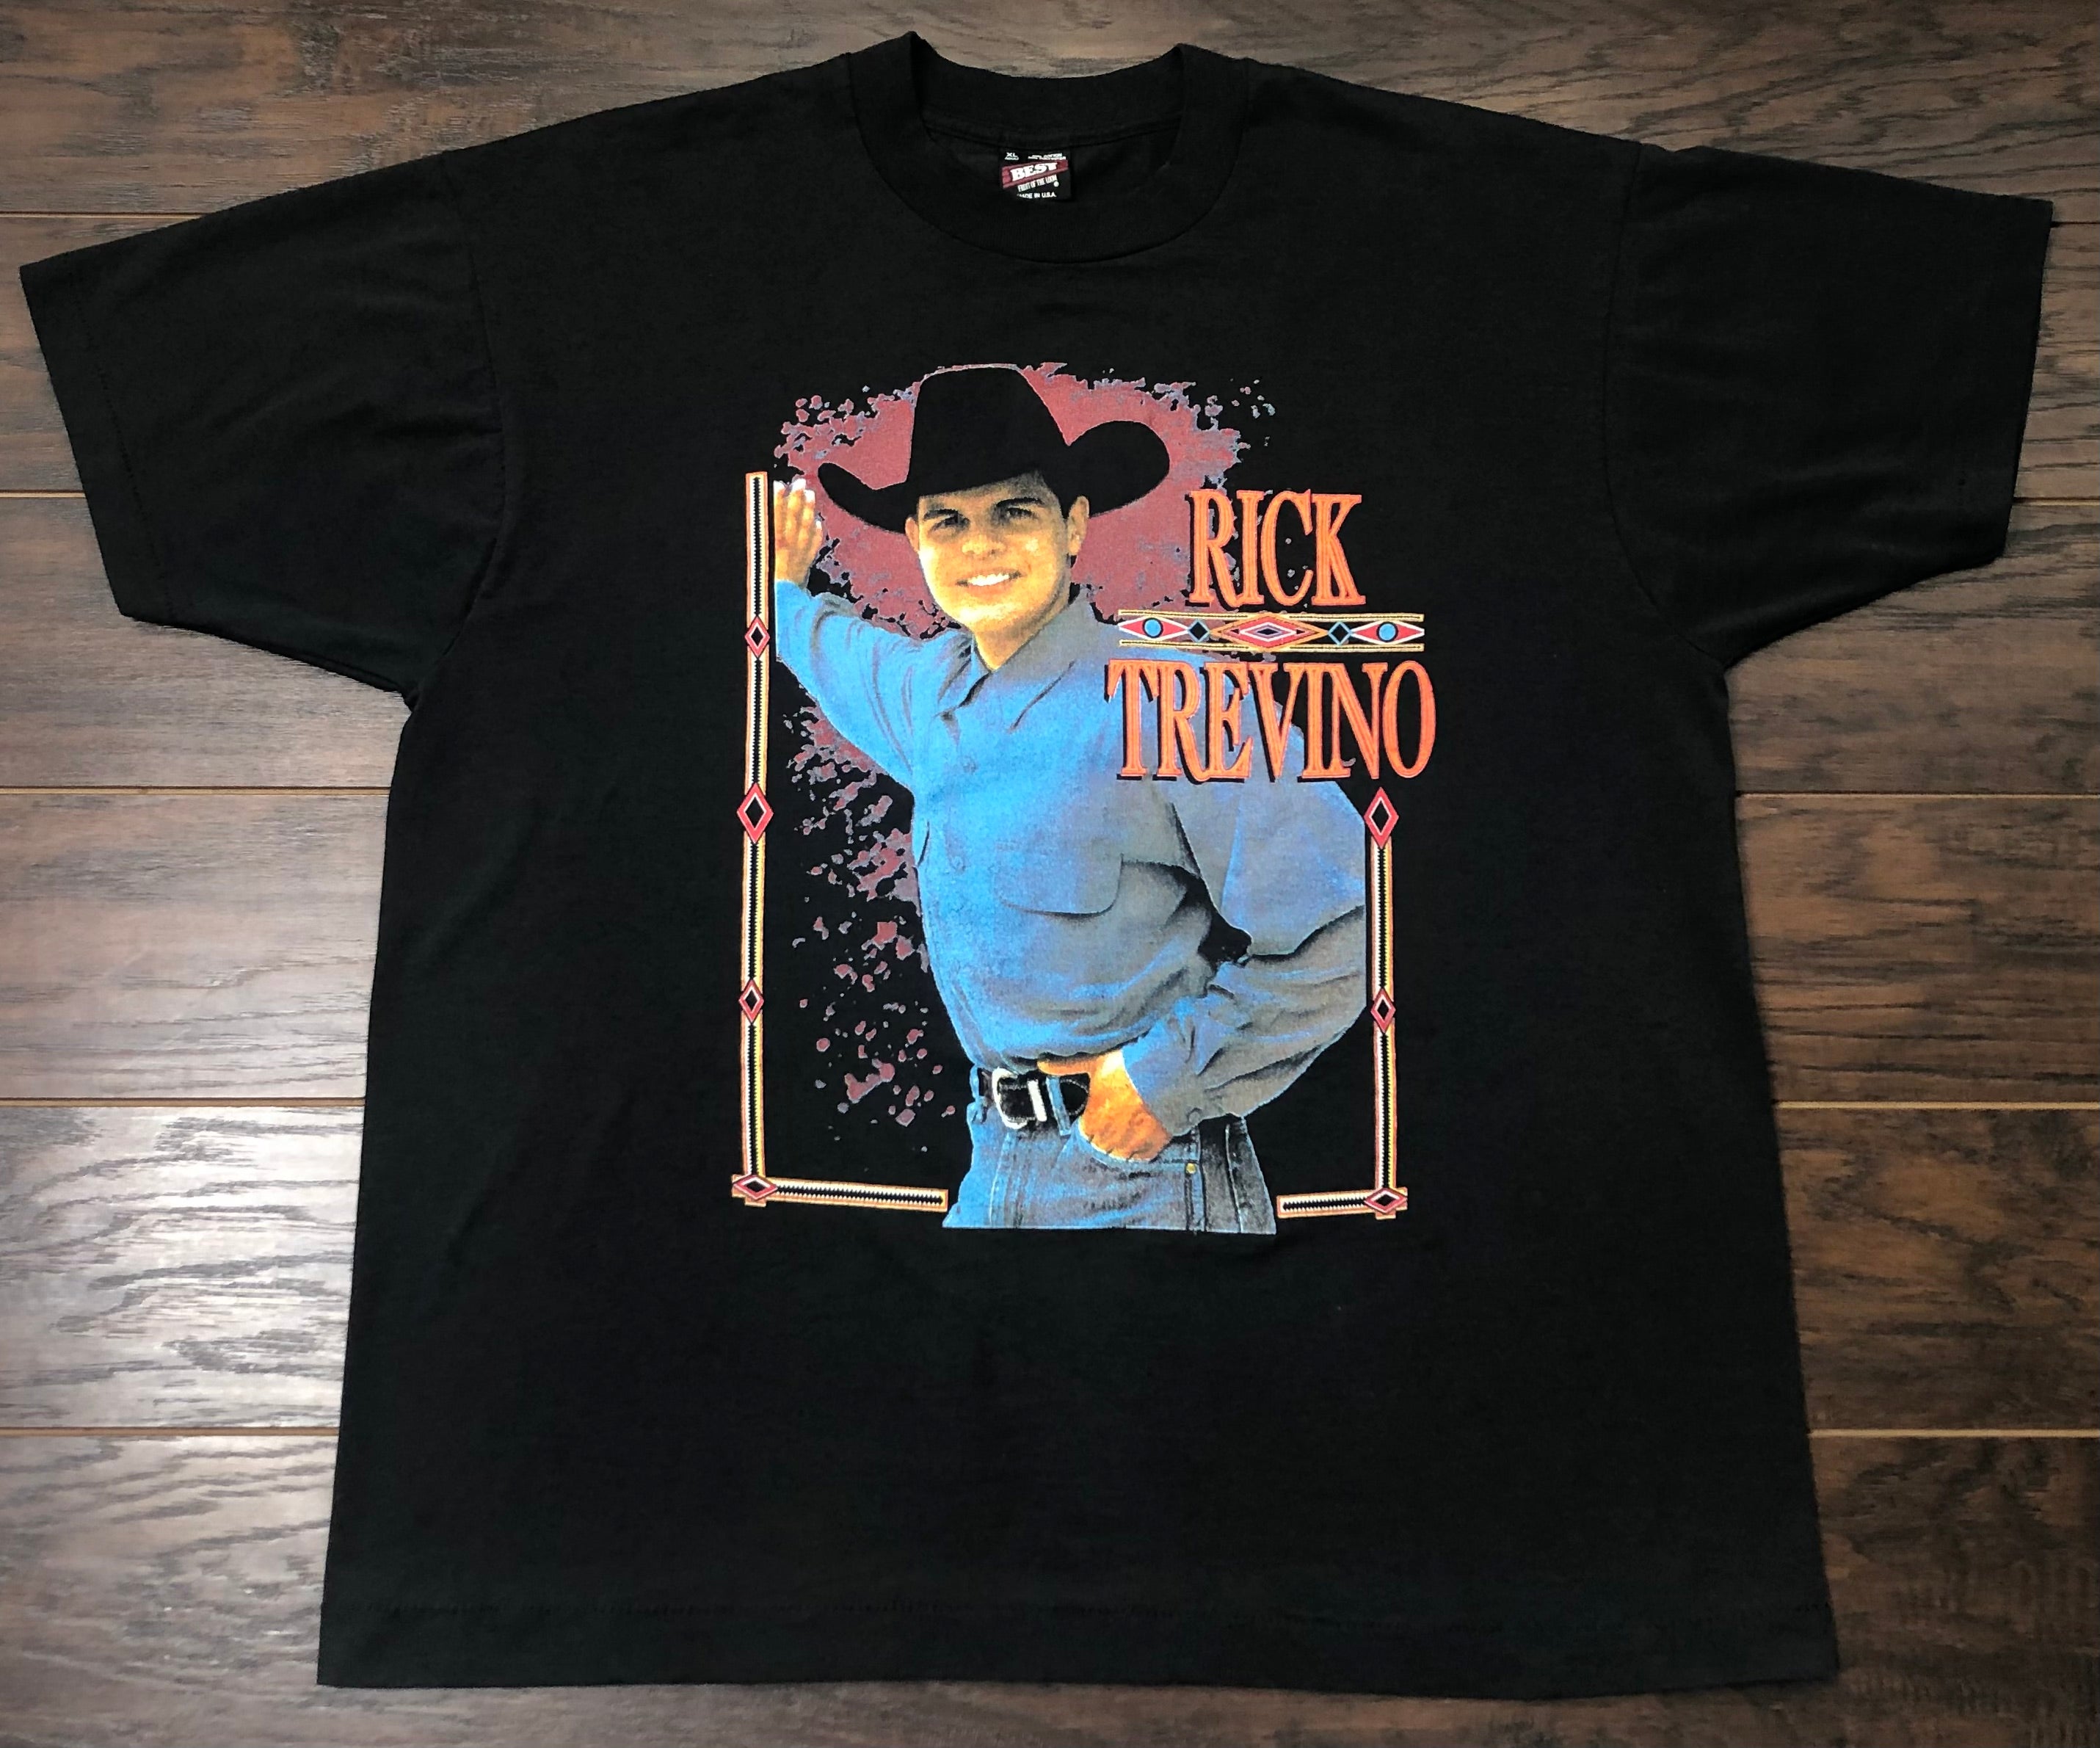 1994 Vintage Western Rick Trevino Country Concert Tour T-Shirt